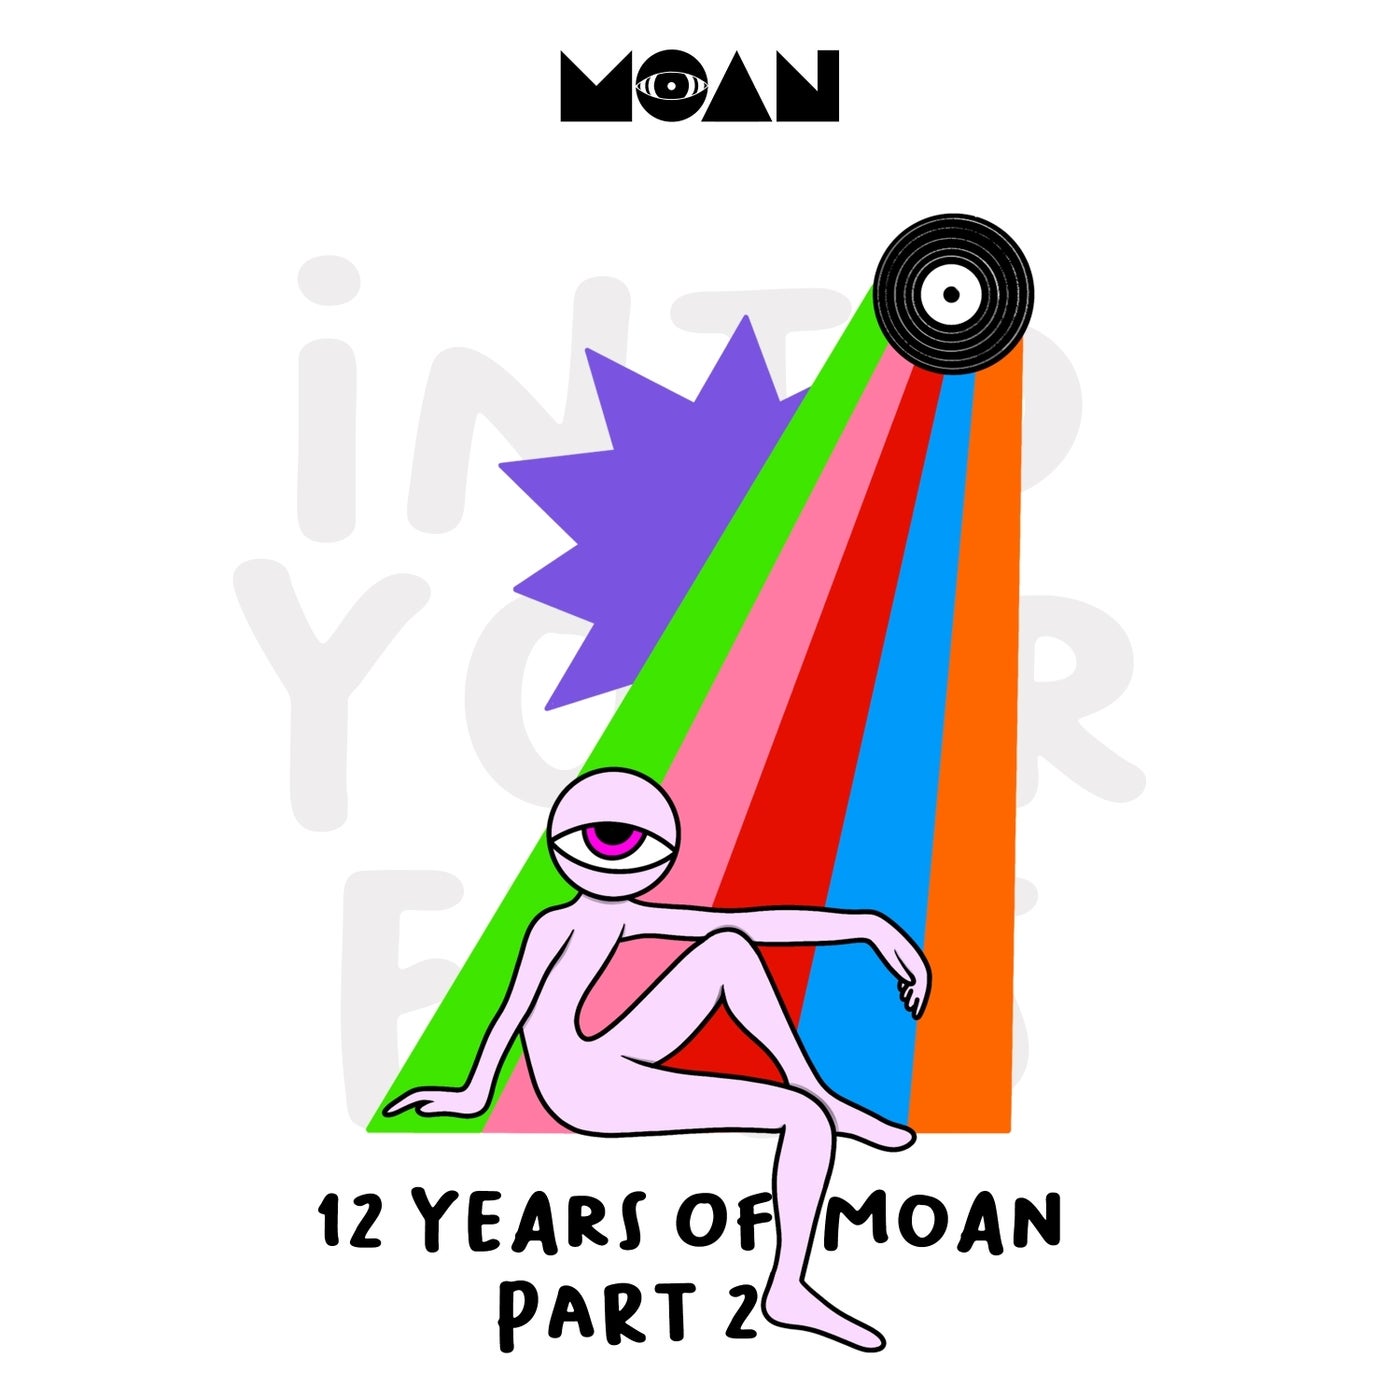 image cover: VA - 12 Years of Moan Part 2 on Moan